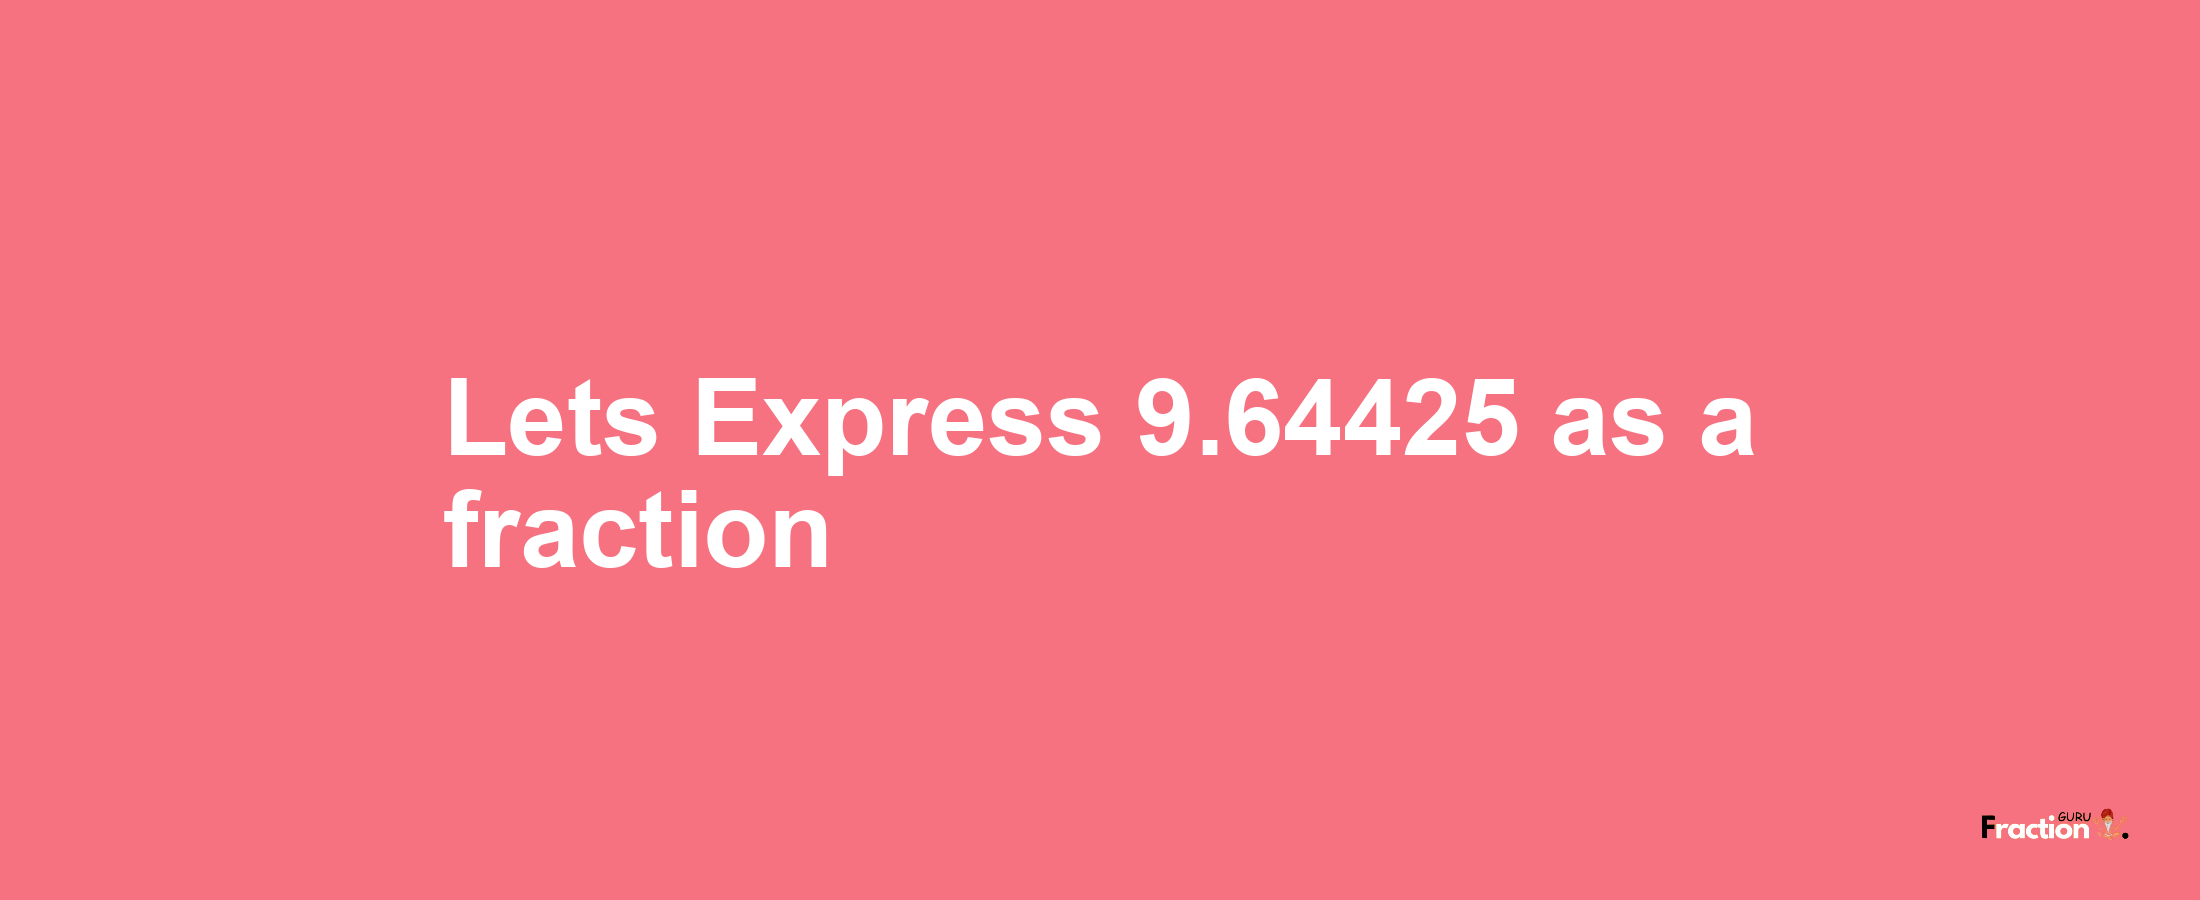 Lets Express 9.64425 as afraction